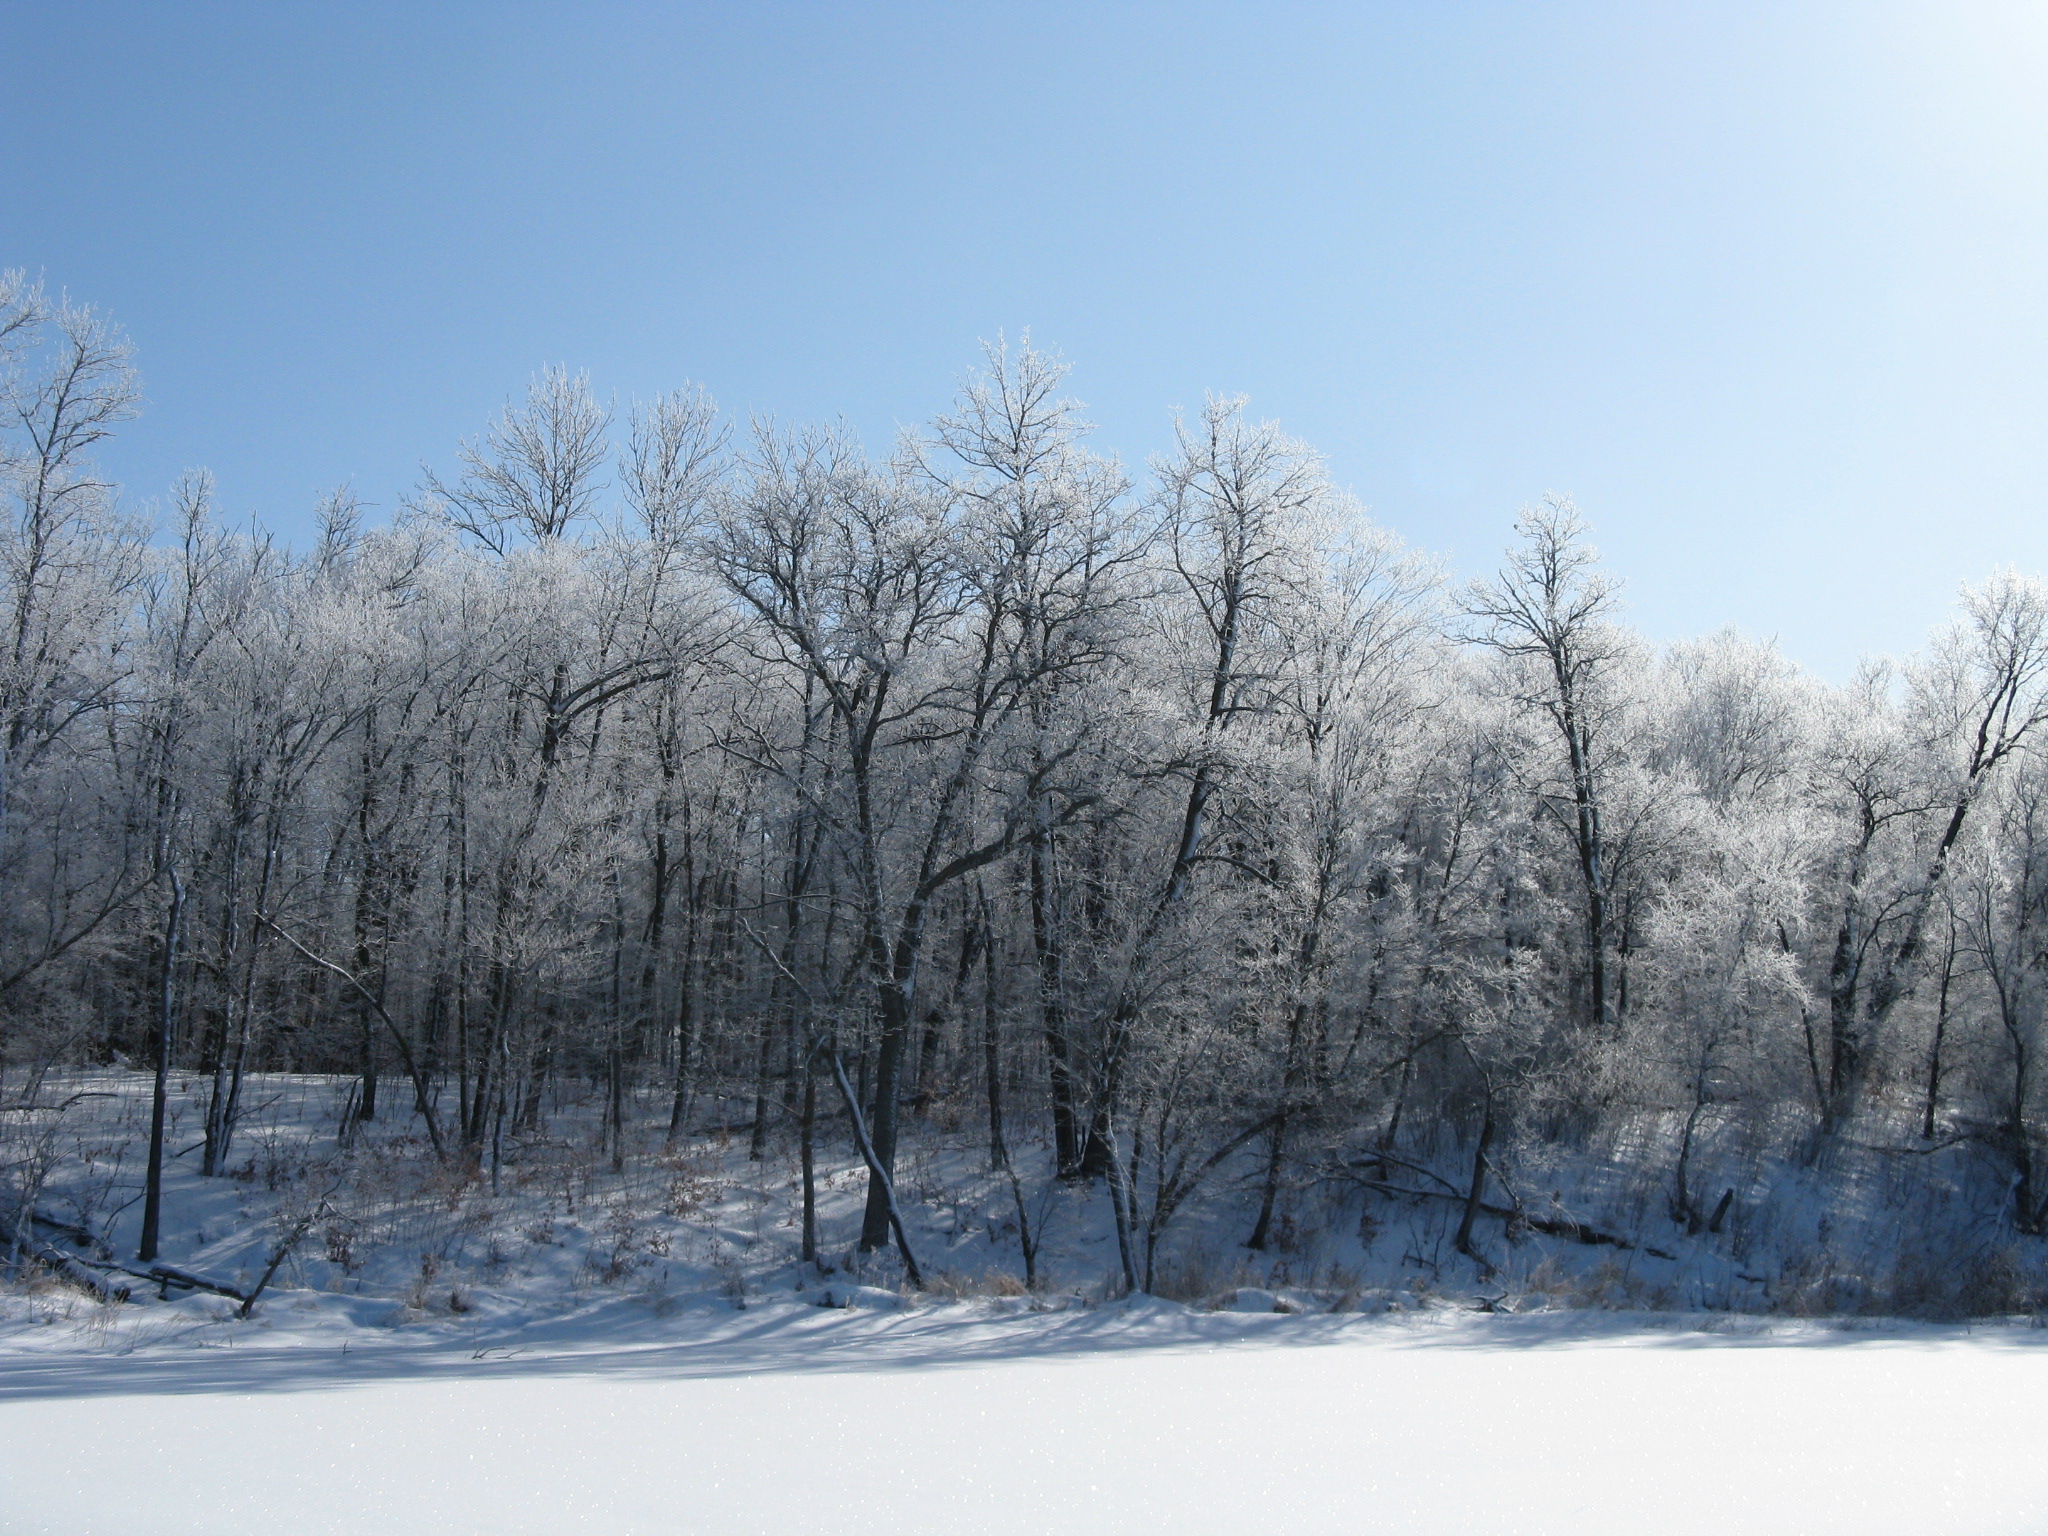 Photo taken by Nanette Moloney of frosted trees from Little Sugarbush.